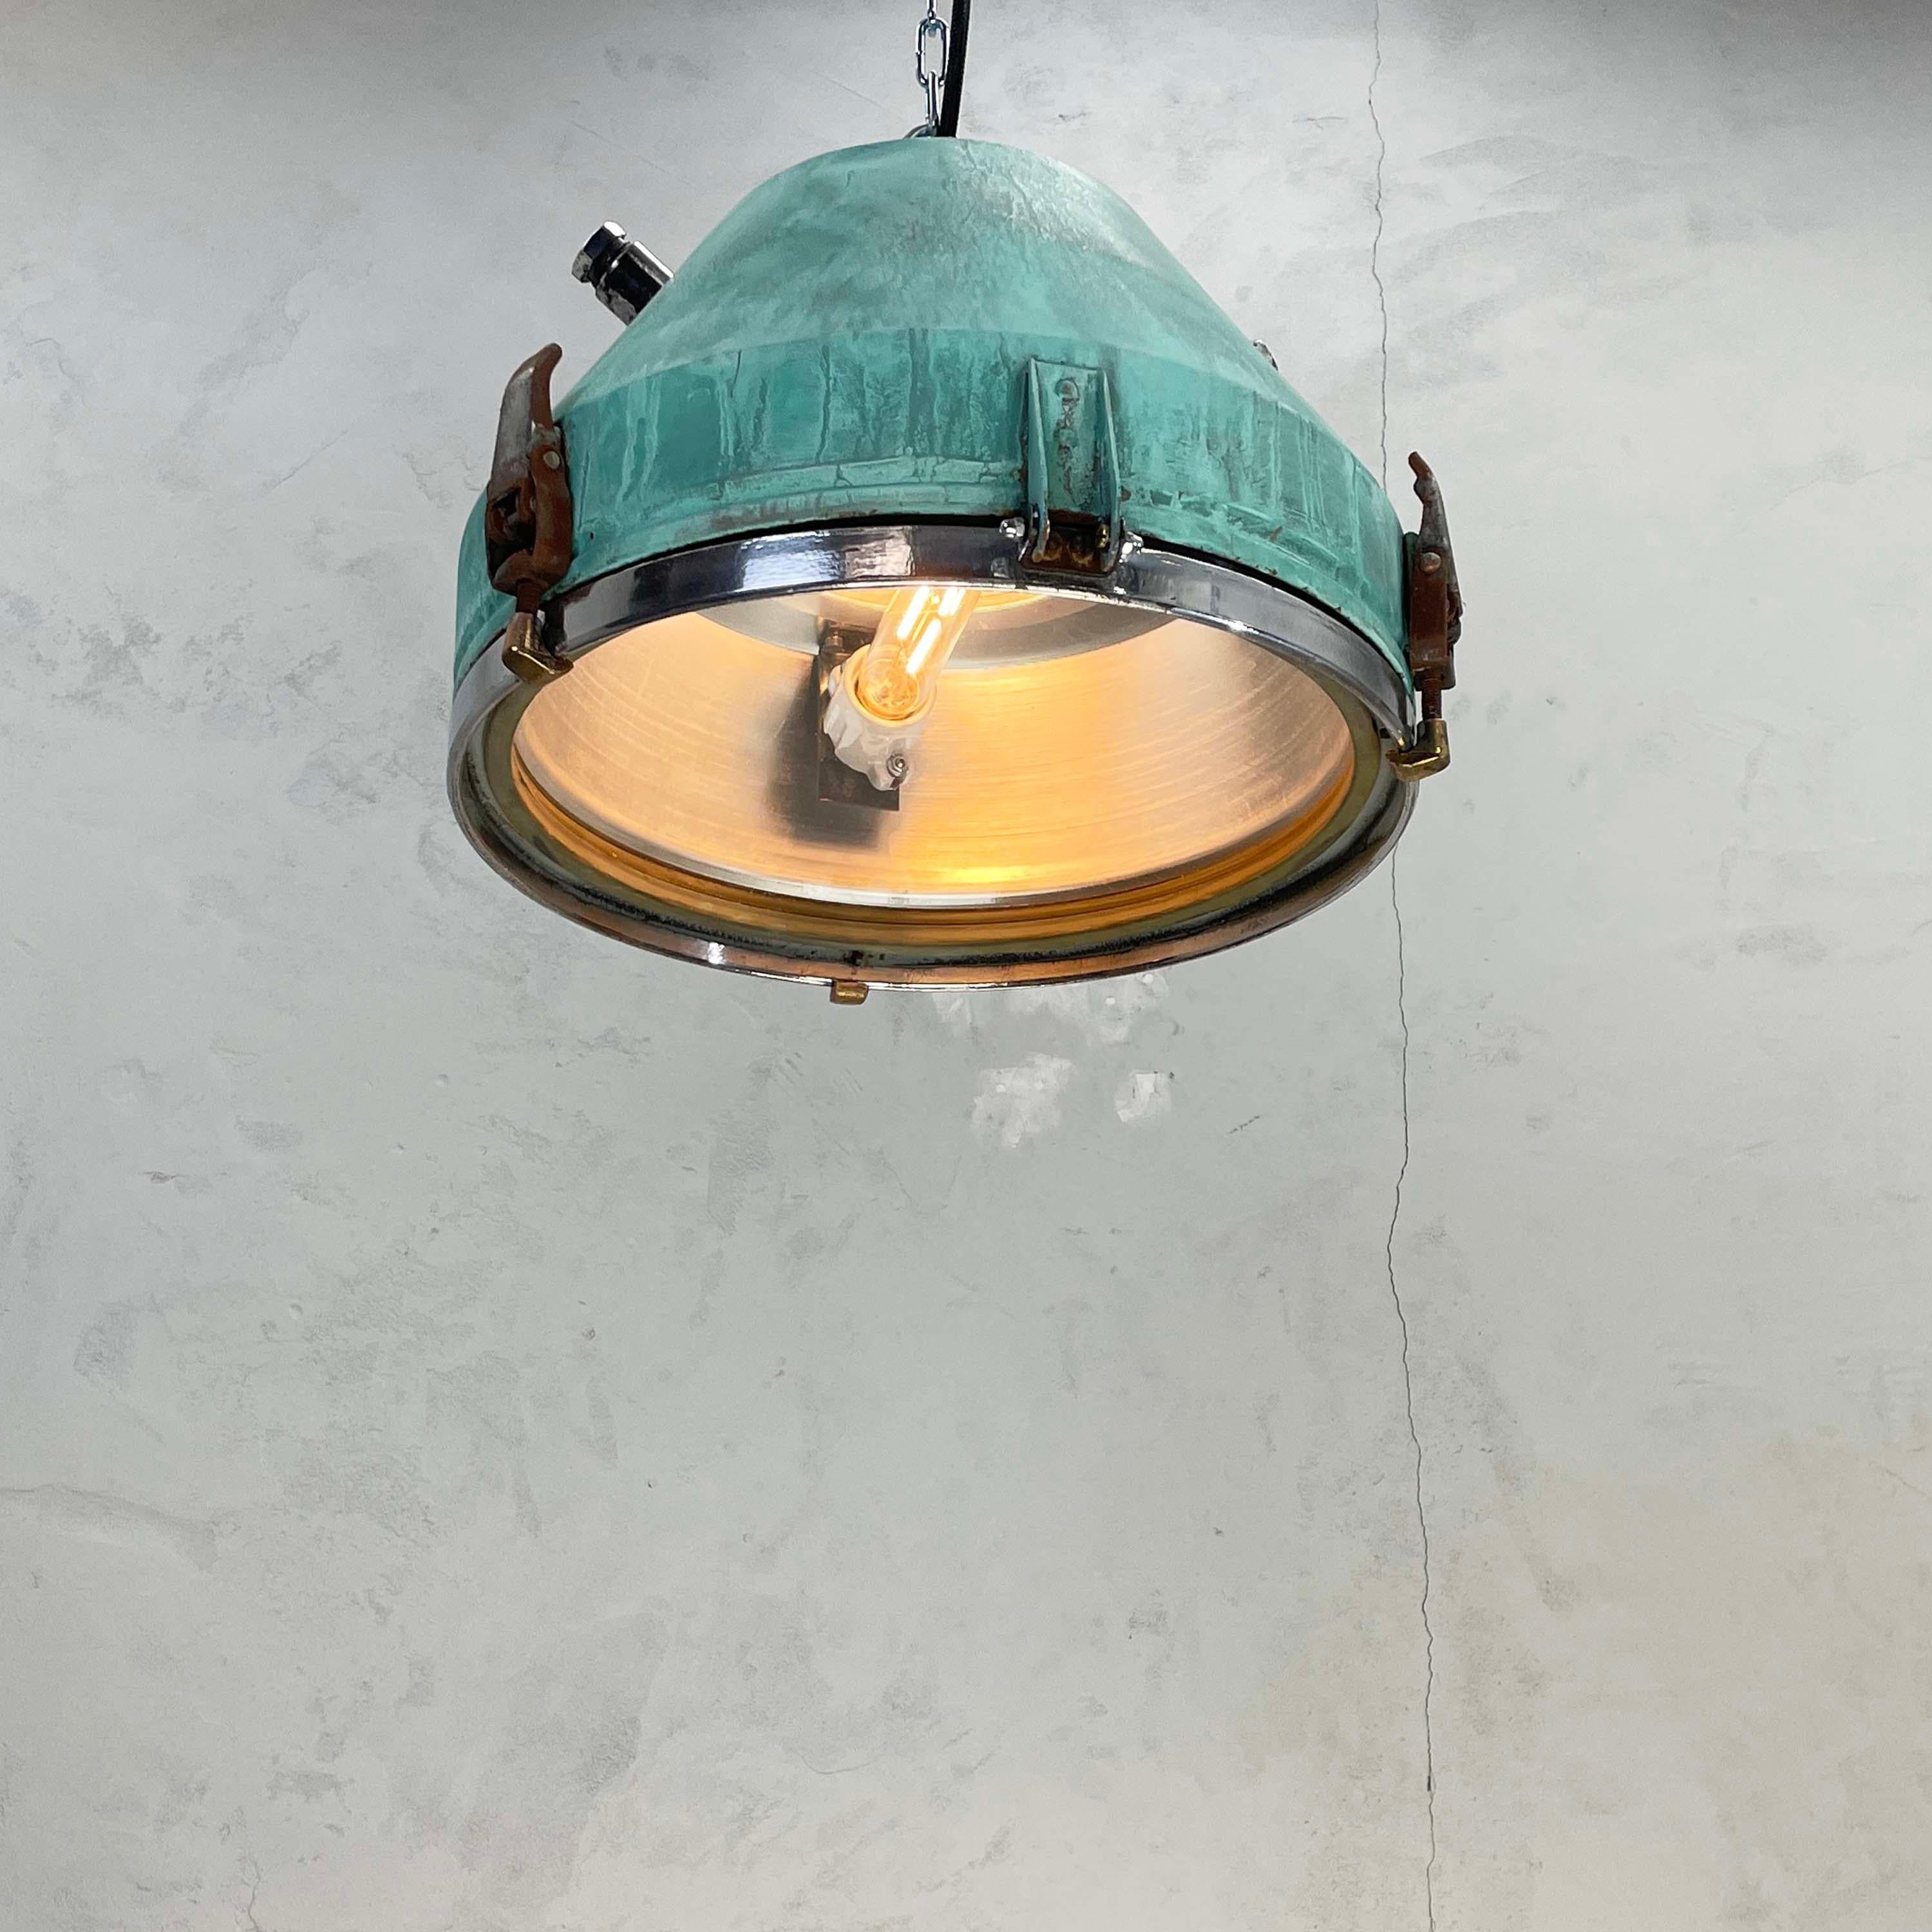 1970's German VEB Steel & Copper Verdigris Industrial Pendant Lamp, Teal Finish In Good Condition For Sale In Leicester, Leicestershire